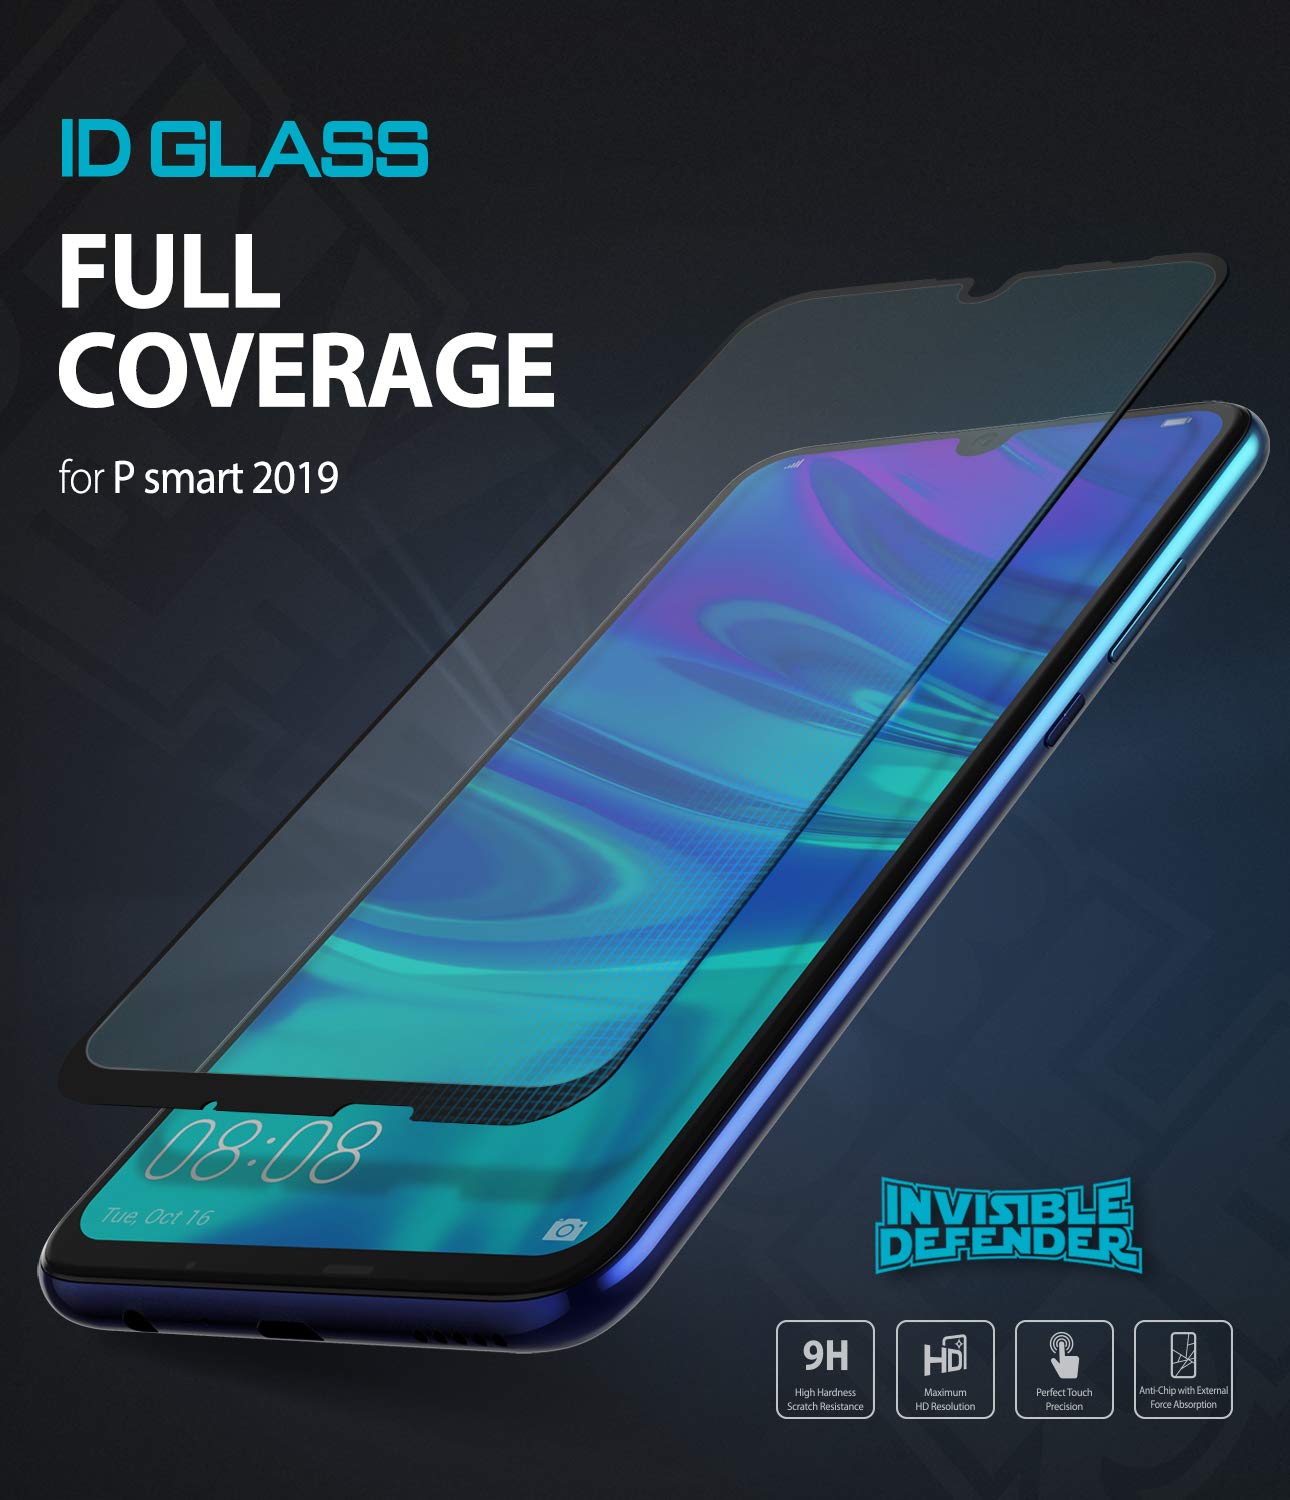 huawei p smart 2019 invisible defender glass full coverage screen protector